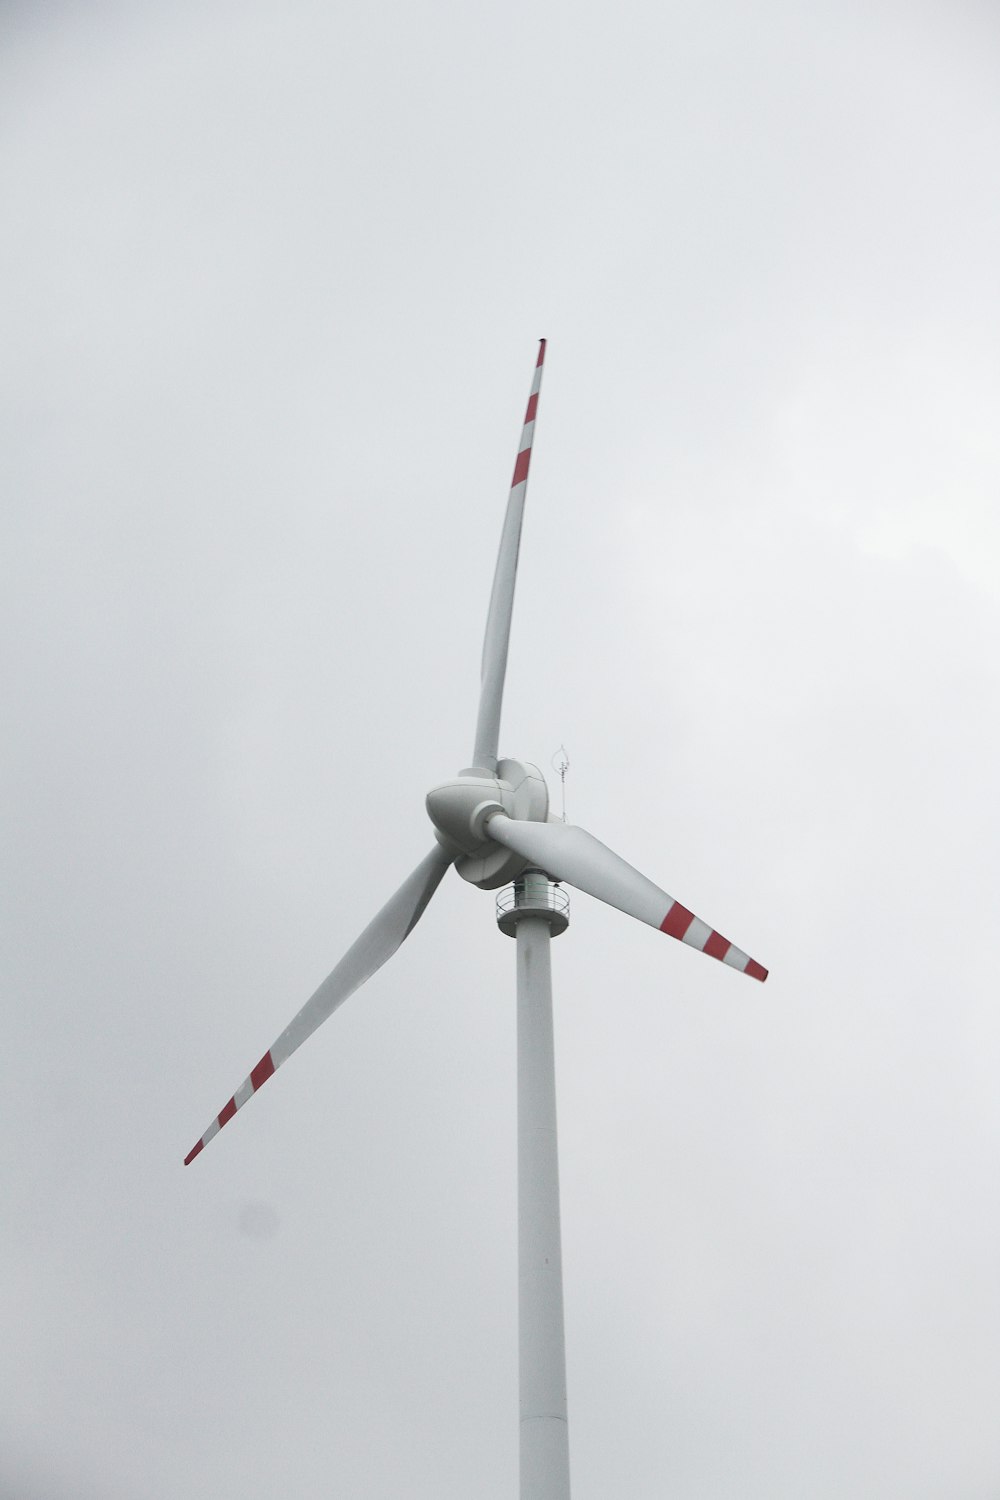 a wind turbine is shown against a cloudy sky